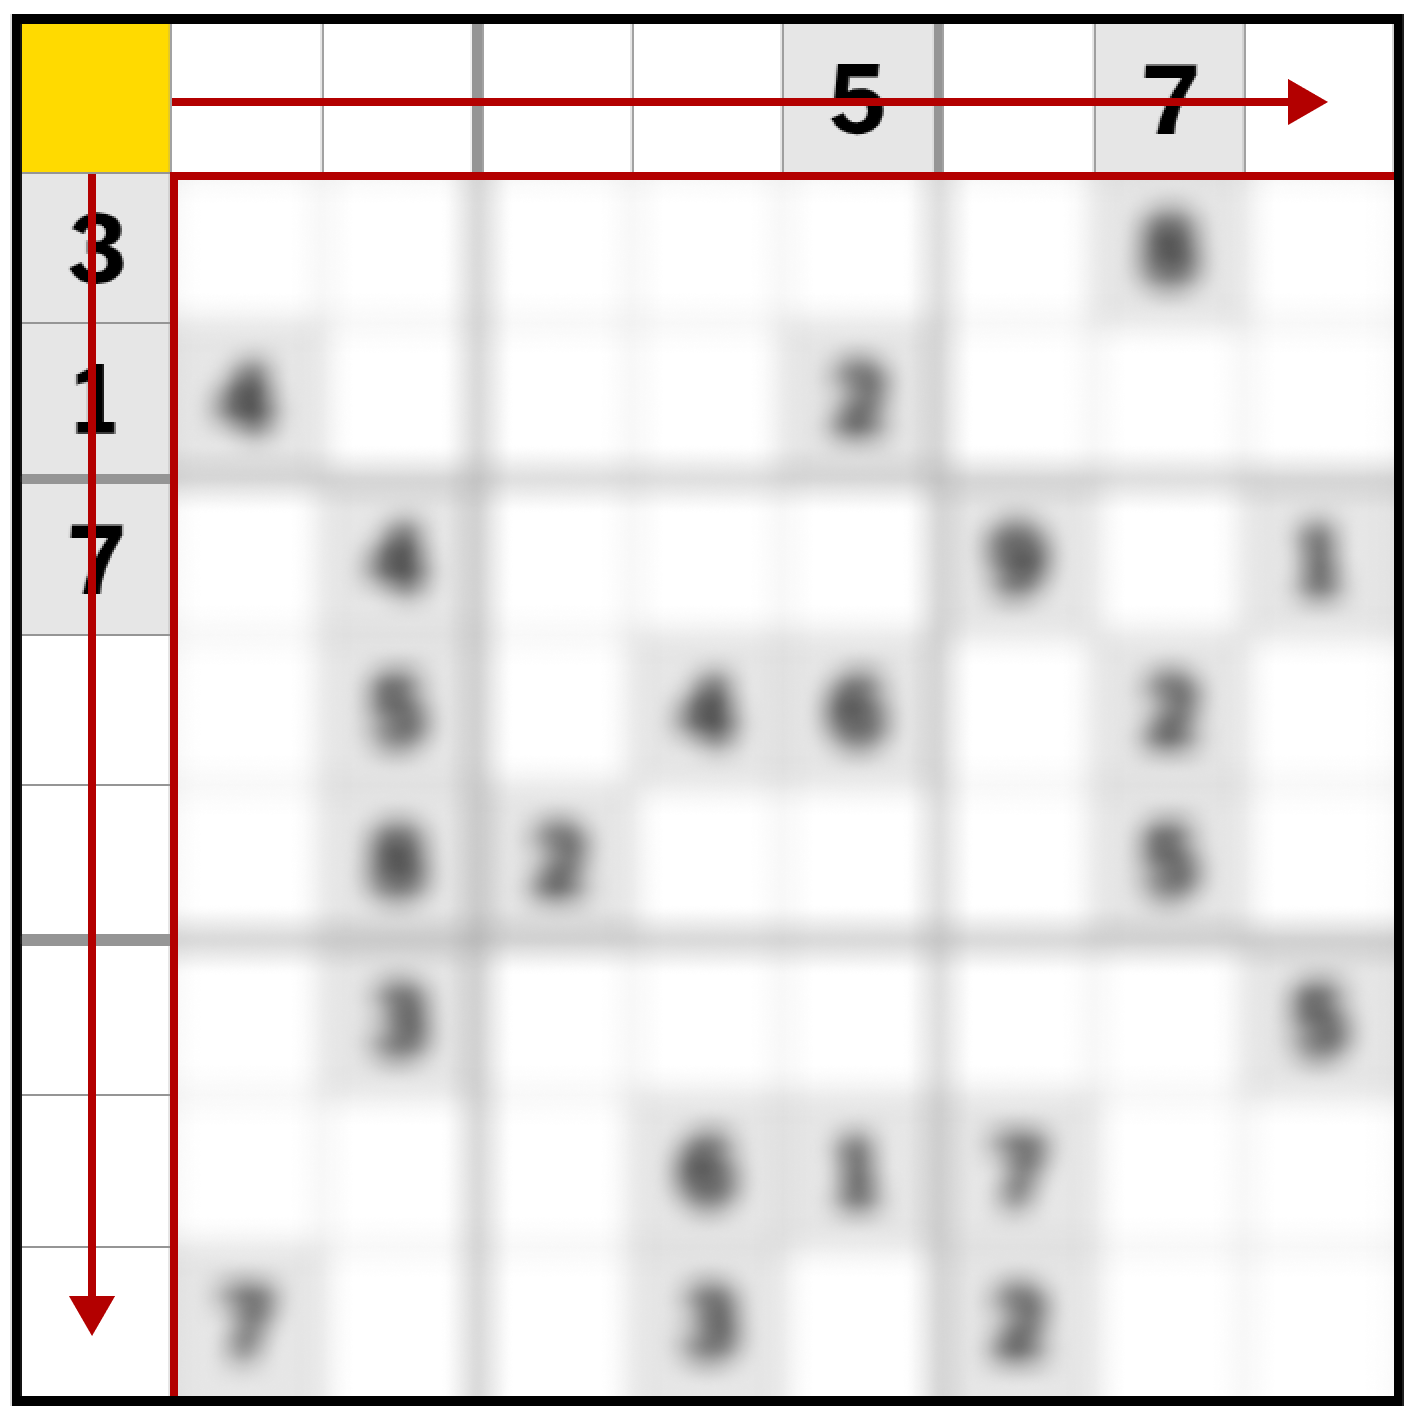 A screenshot of a sudoku grid with one cell highlighted. The row and column of this cell is focused, while the rest of the grid is blurred out, to emphasize slicing and dicing.